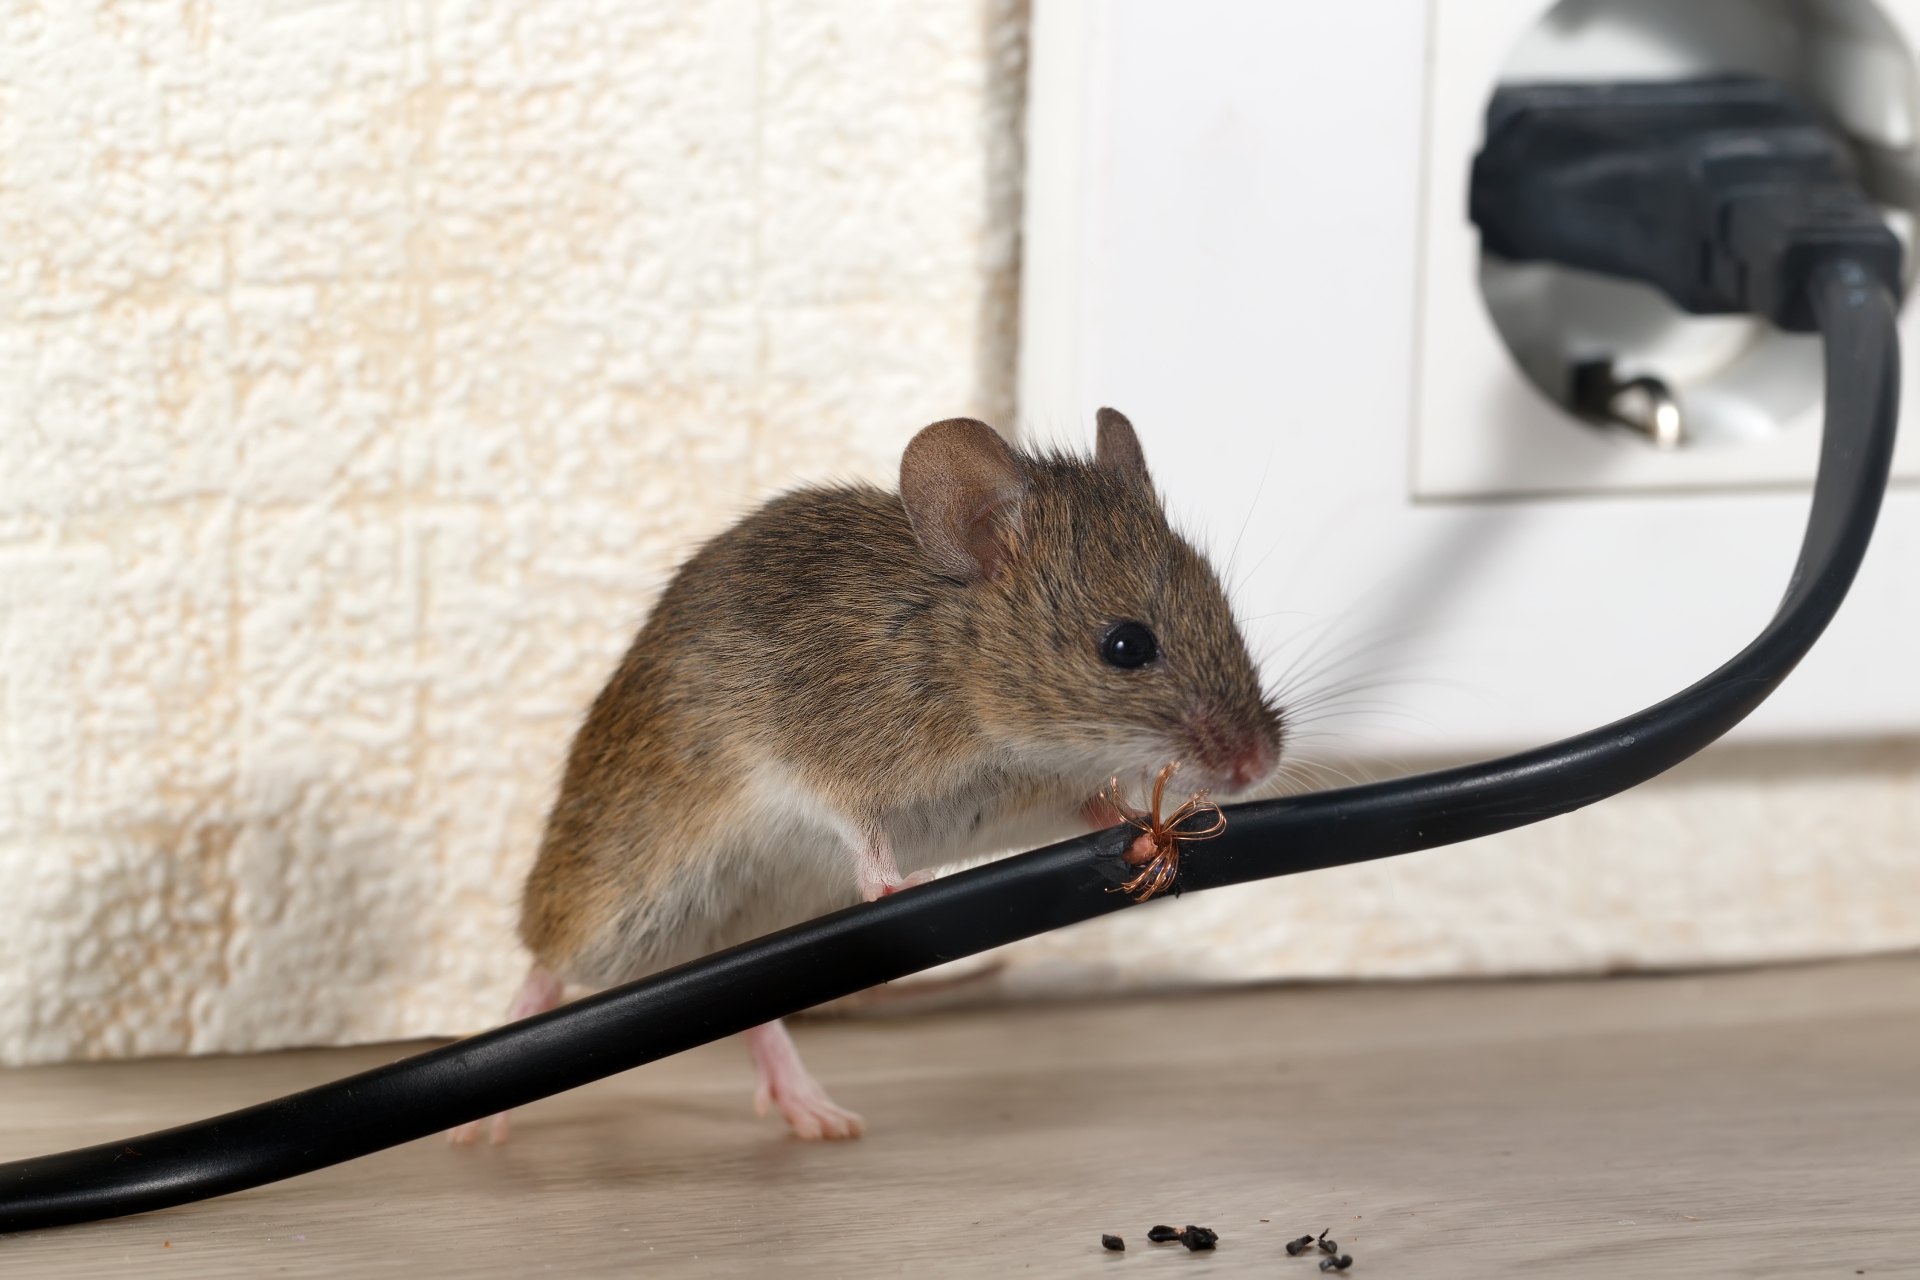 Mice Infestation, Pest Control in Earlsfield, SW18. Call Now 020 8166 9746